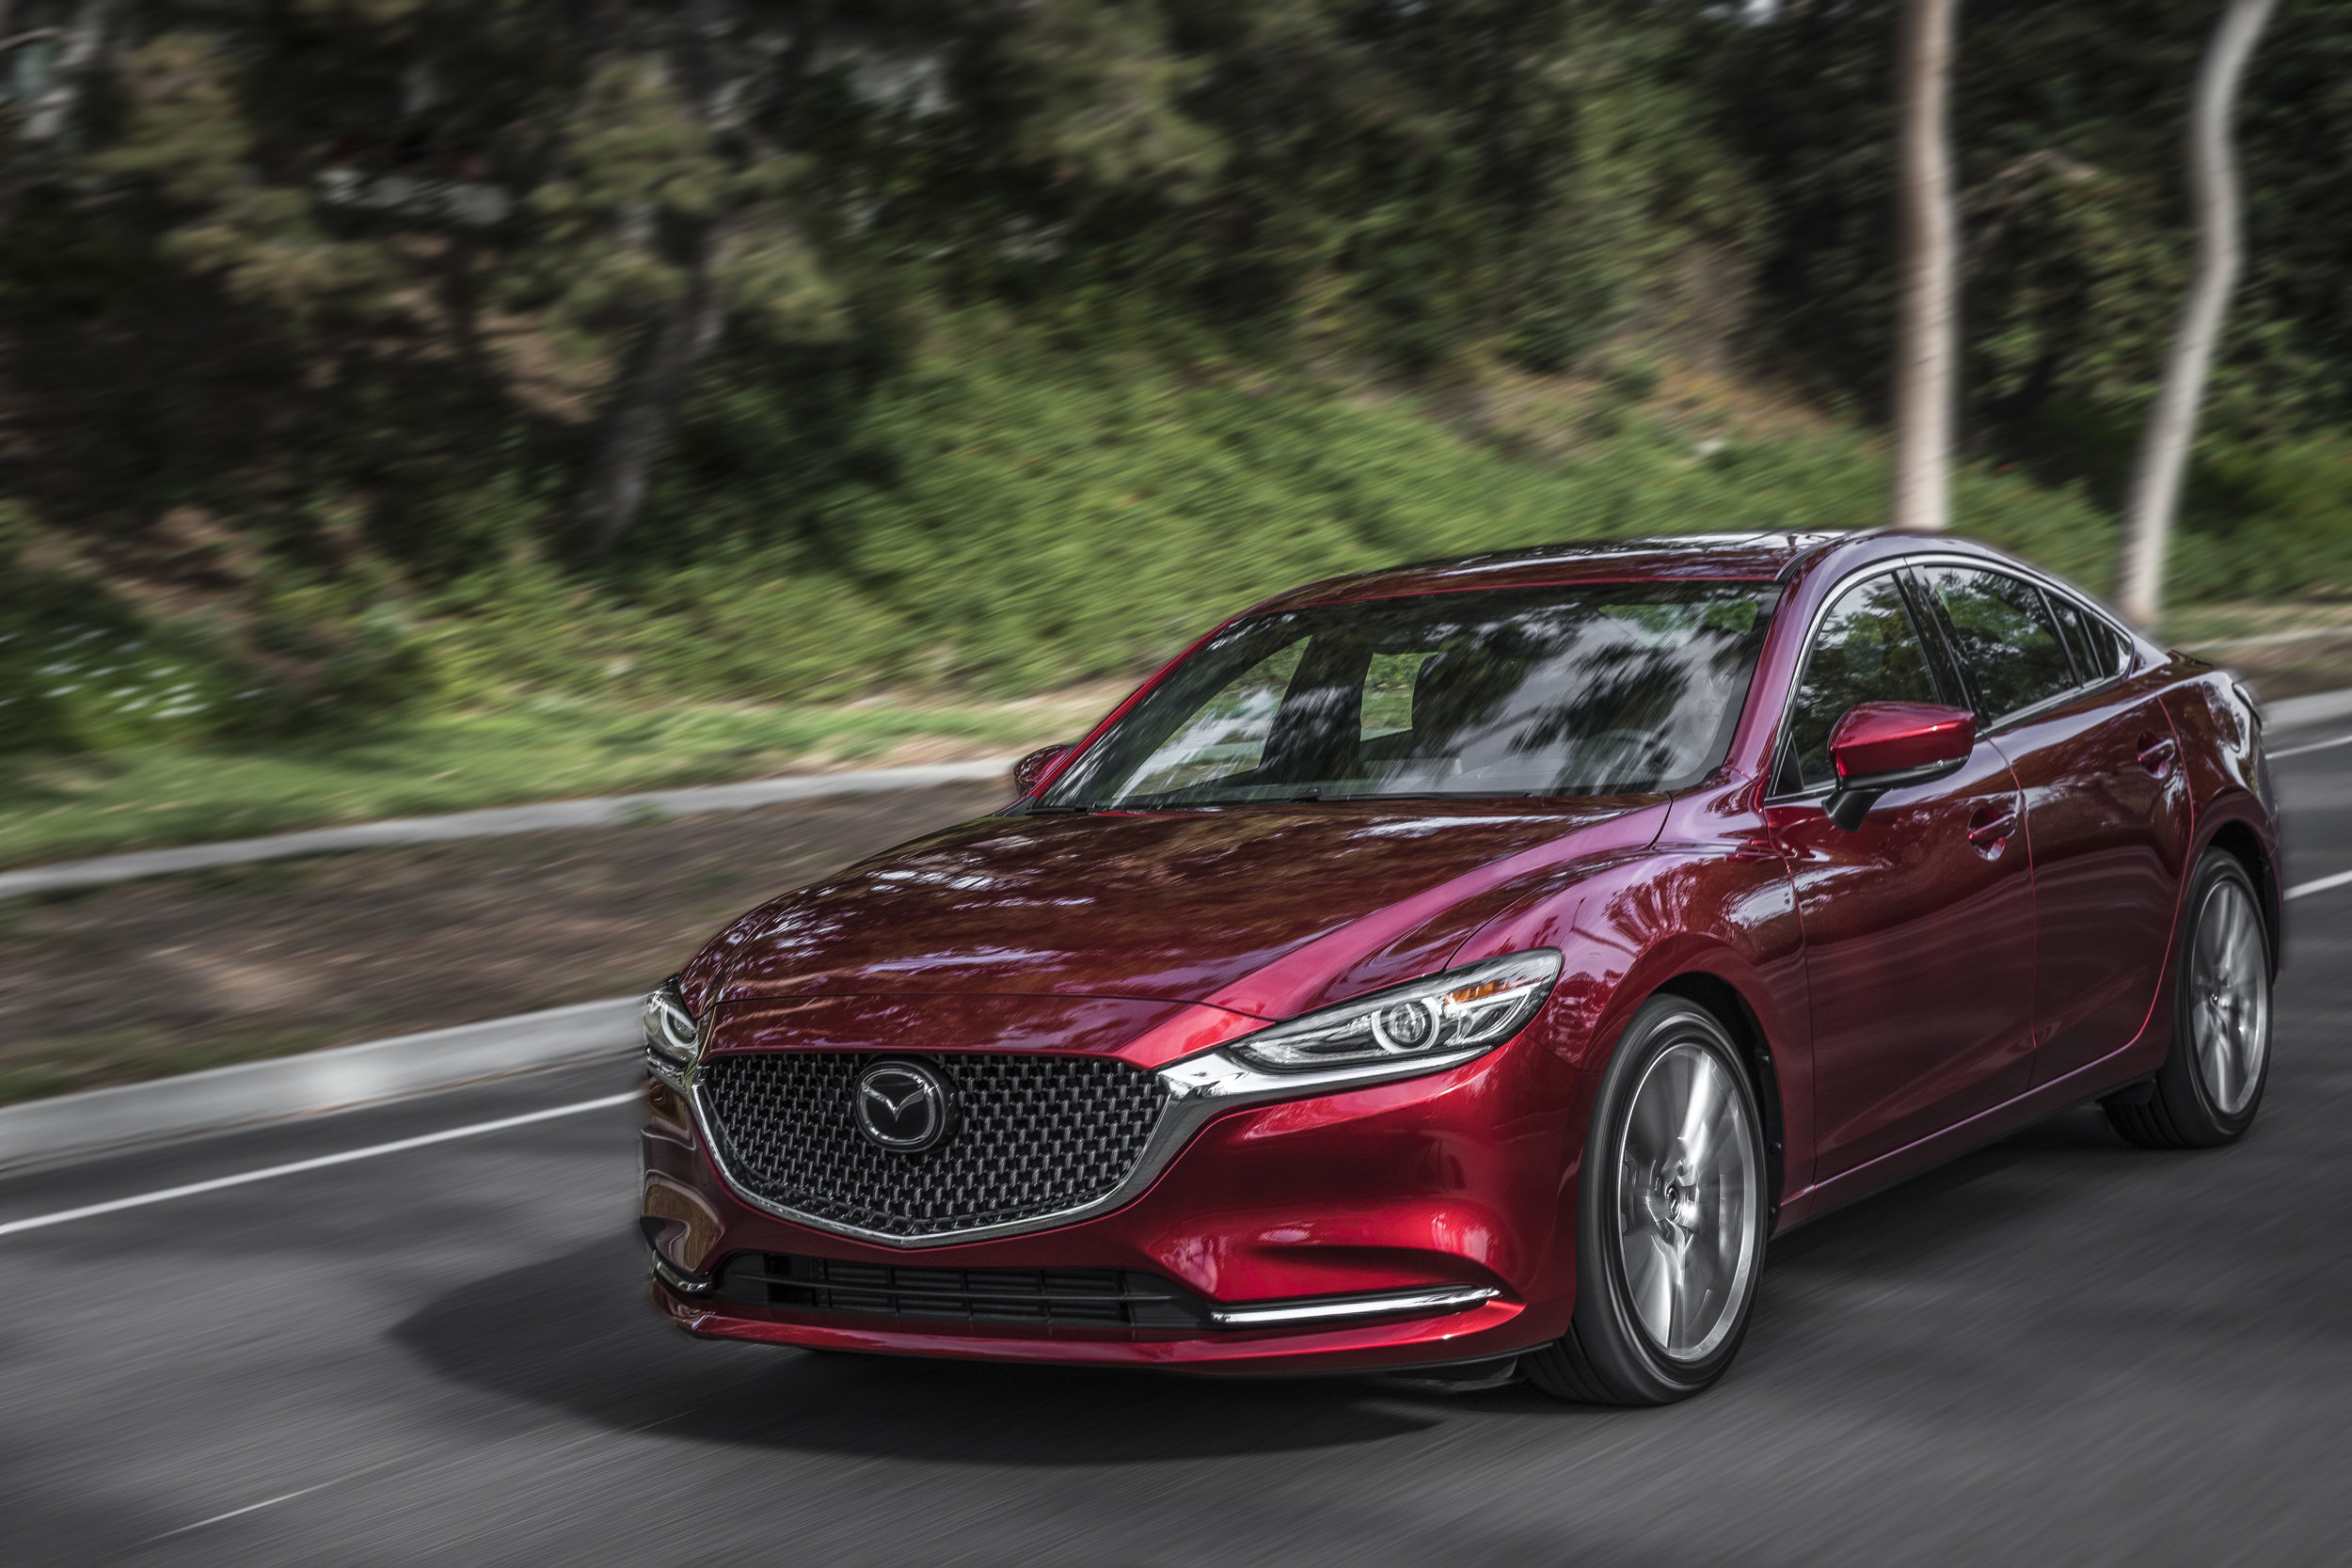 Motion Capture Sensors Create Mazda's Soul Crystal Metallic Paint Process on the Mazda6 and More — Kristin V. Shaw